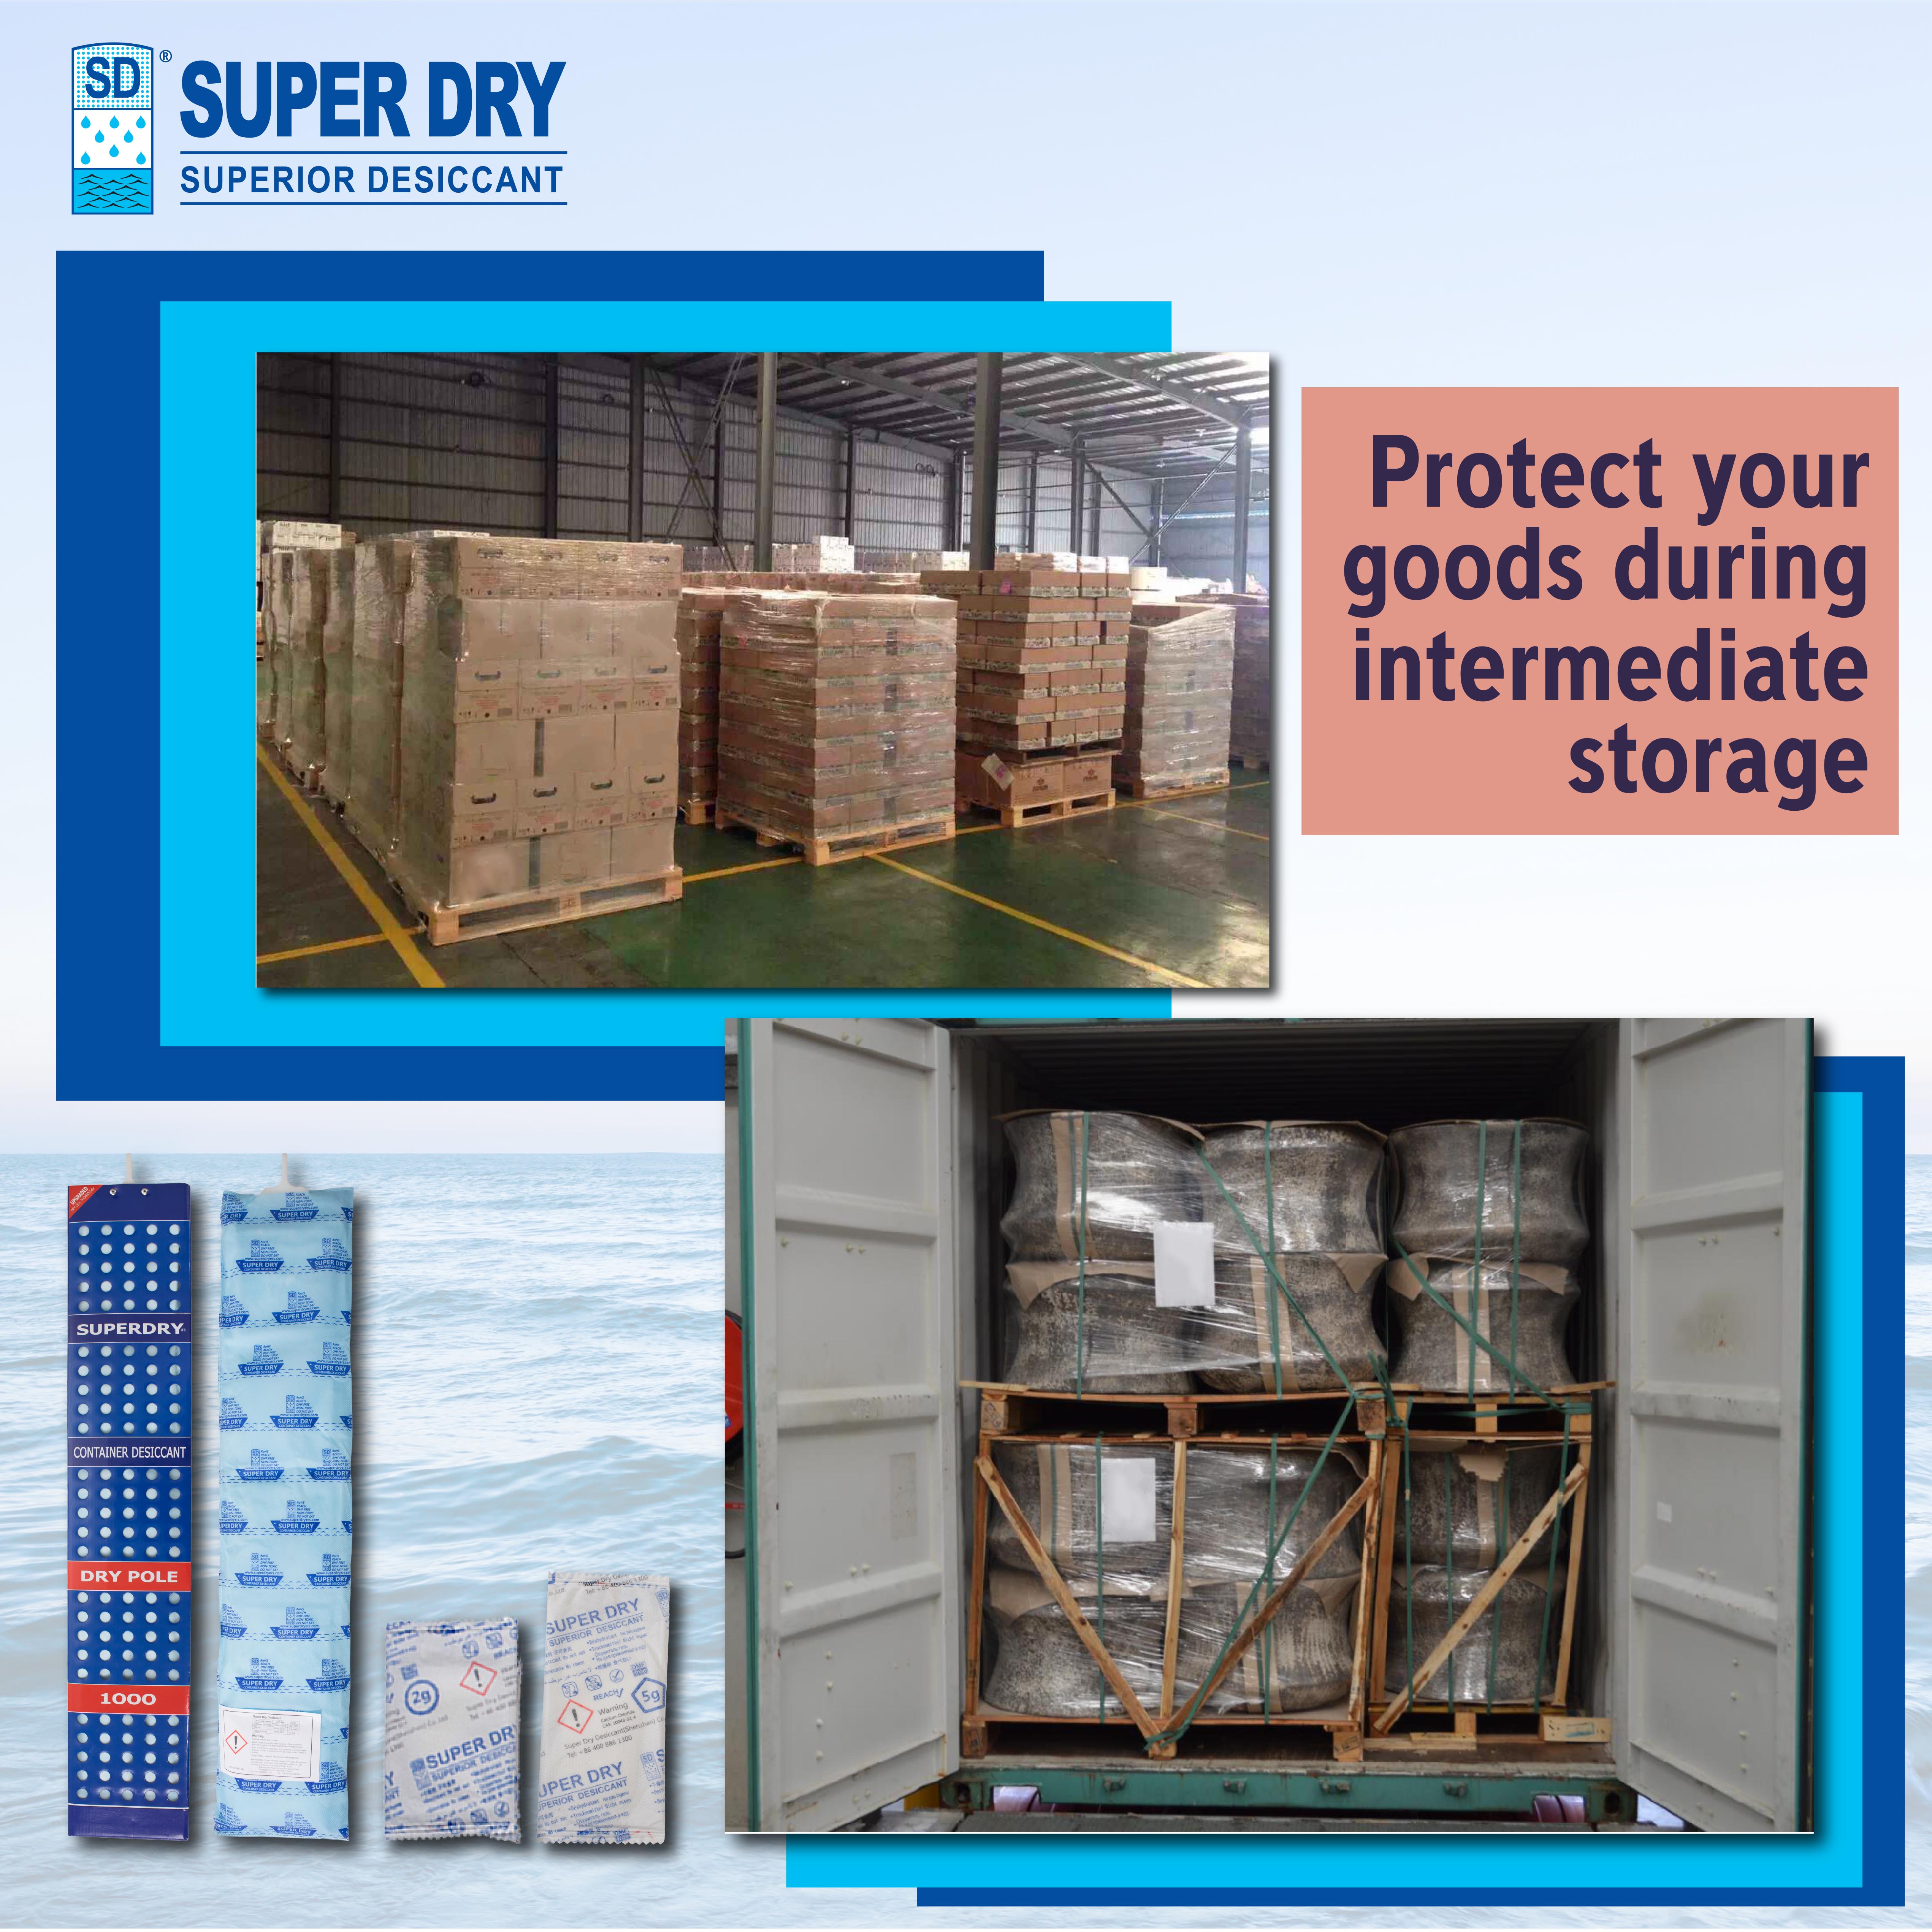 #Protect your goods during intermediate storage